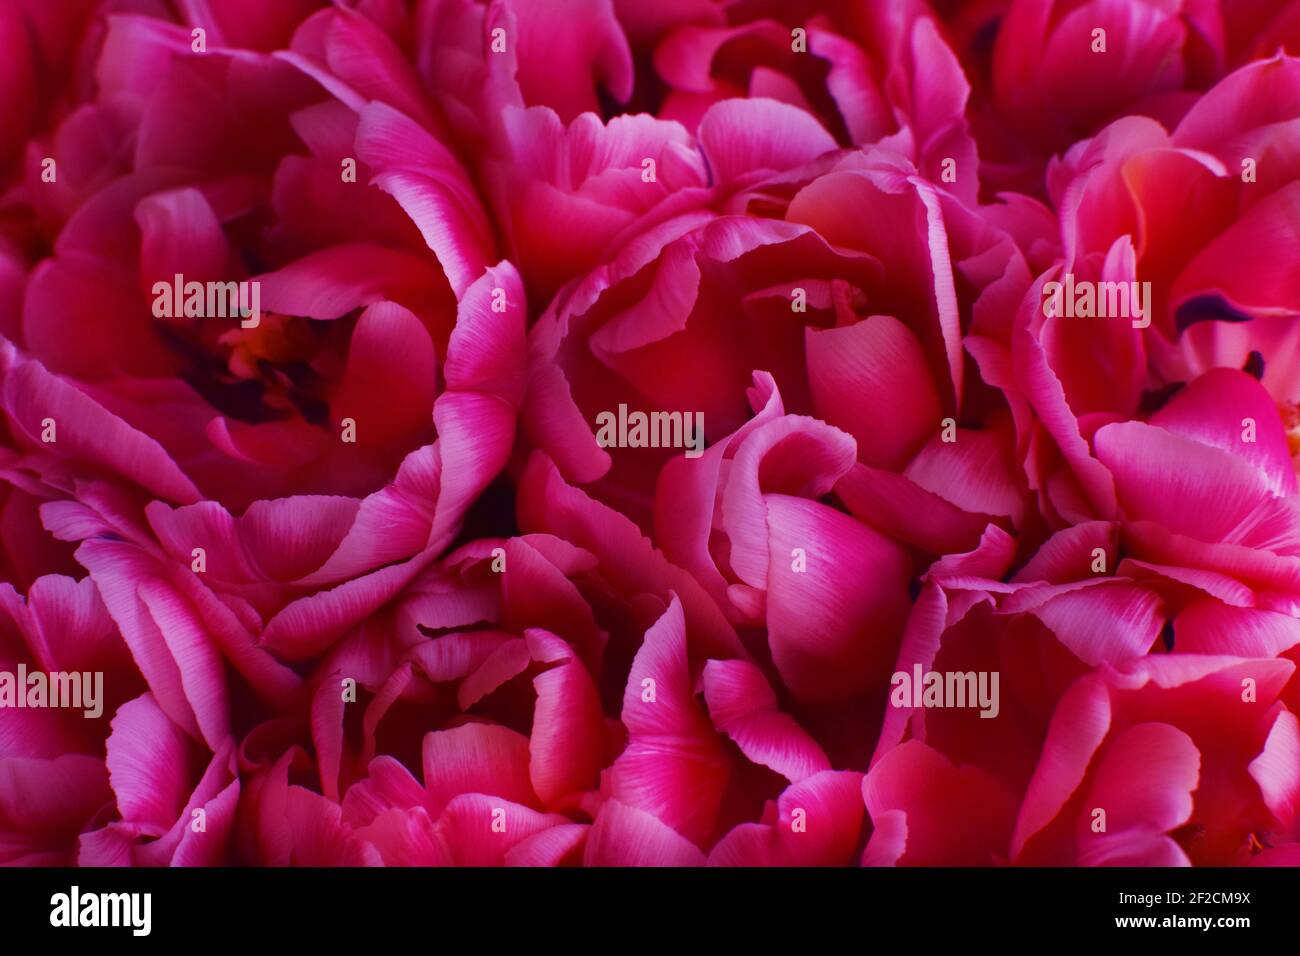 Bouquet of peony pink tulips close-up defocused. Floral background. Stock Photo